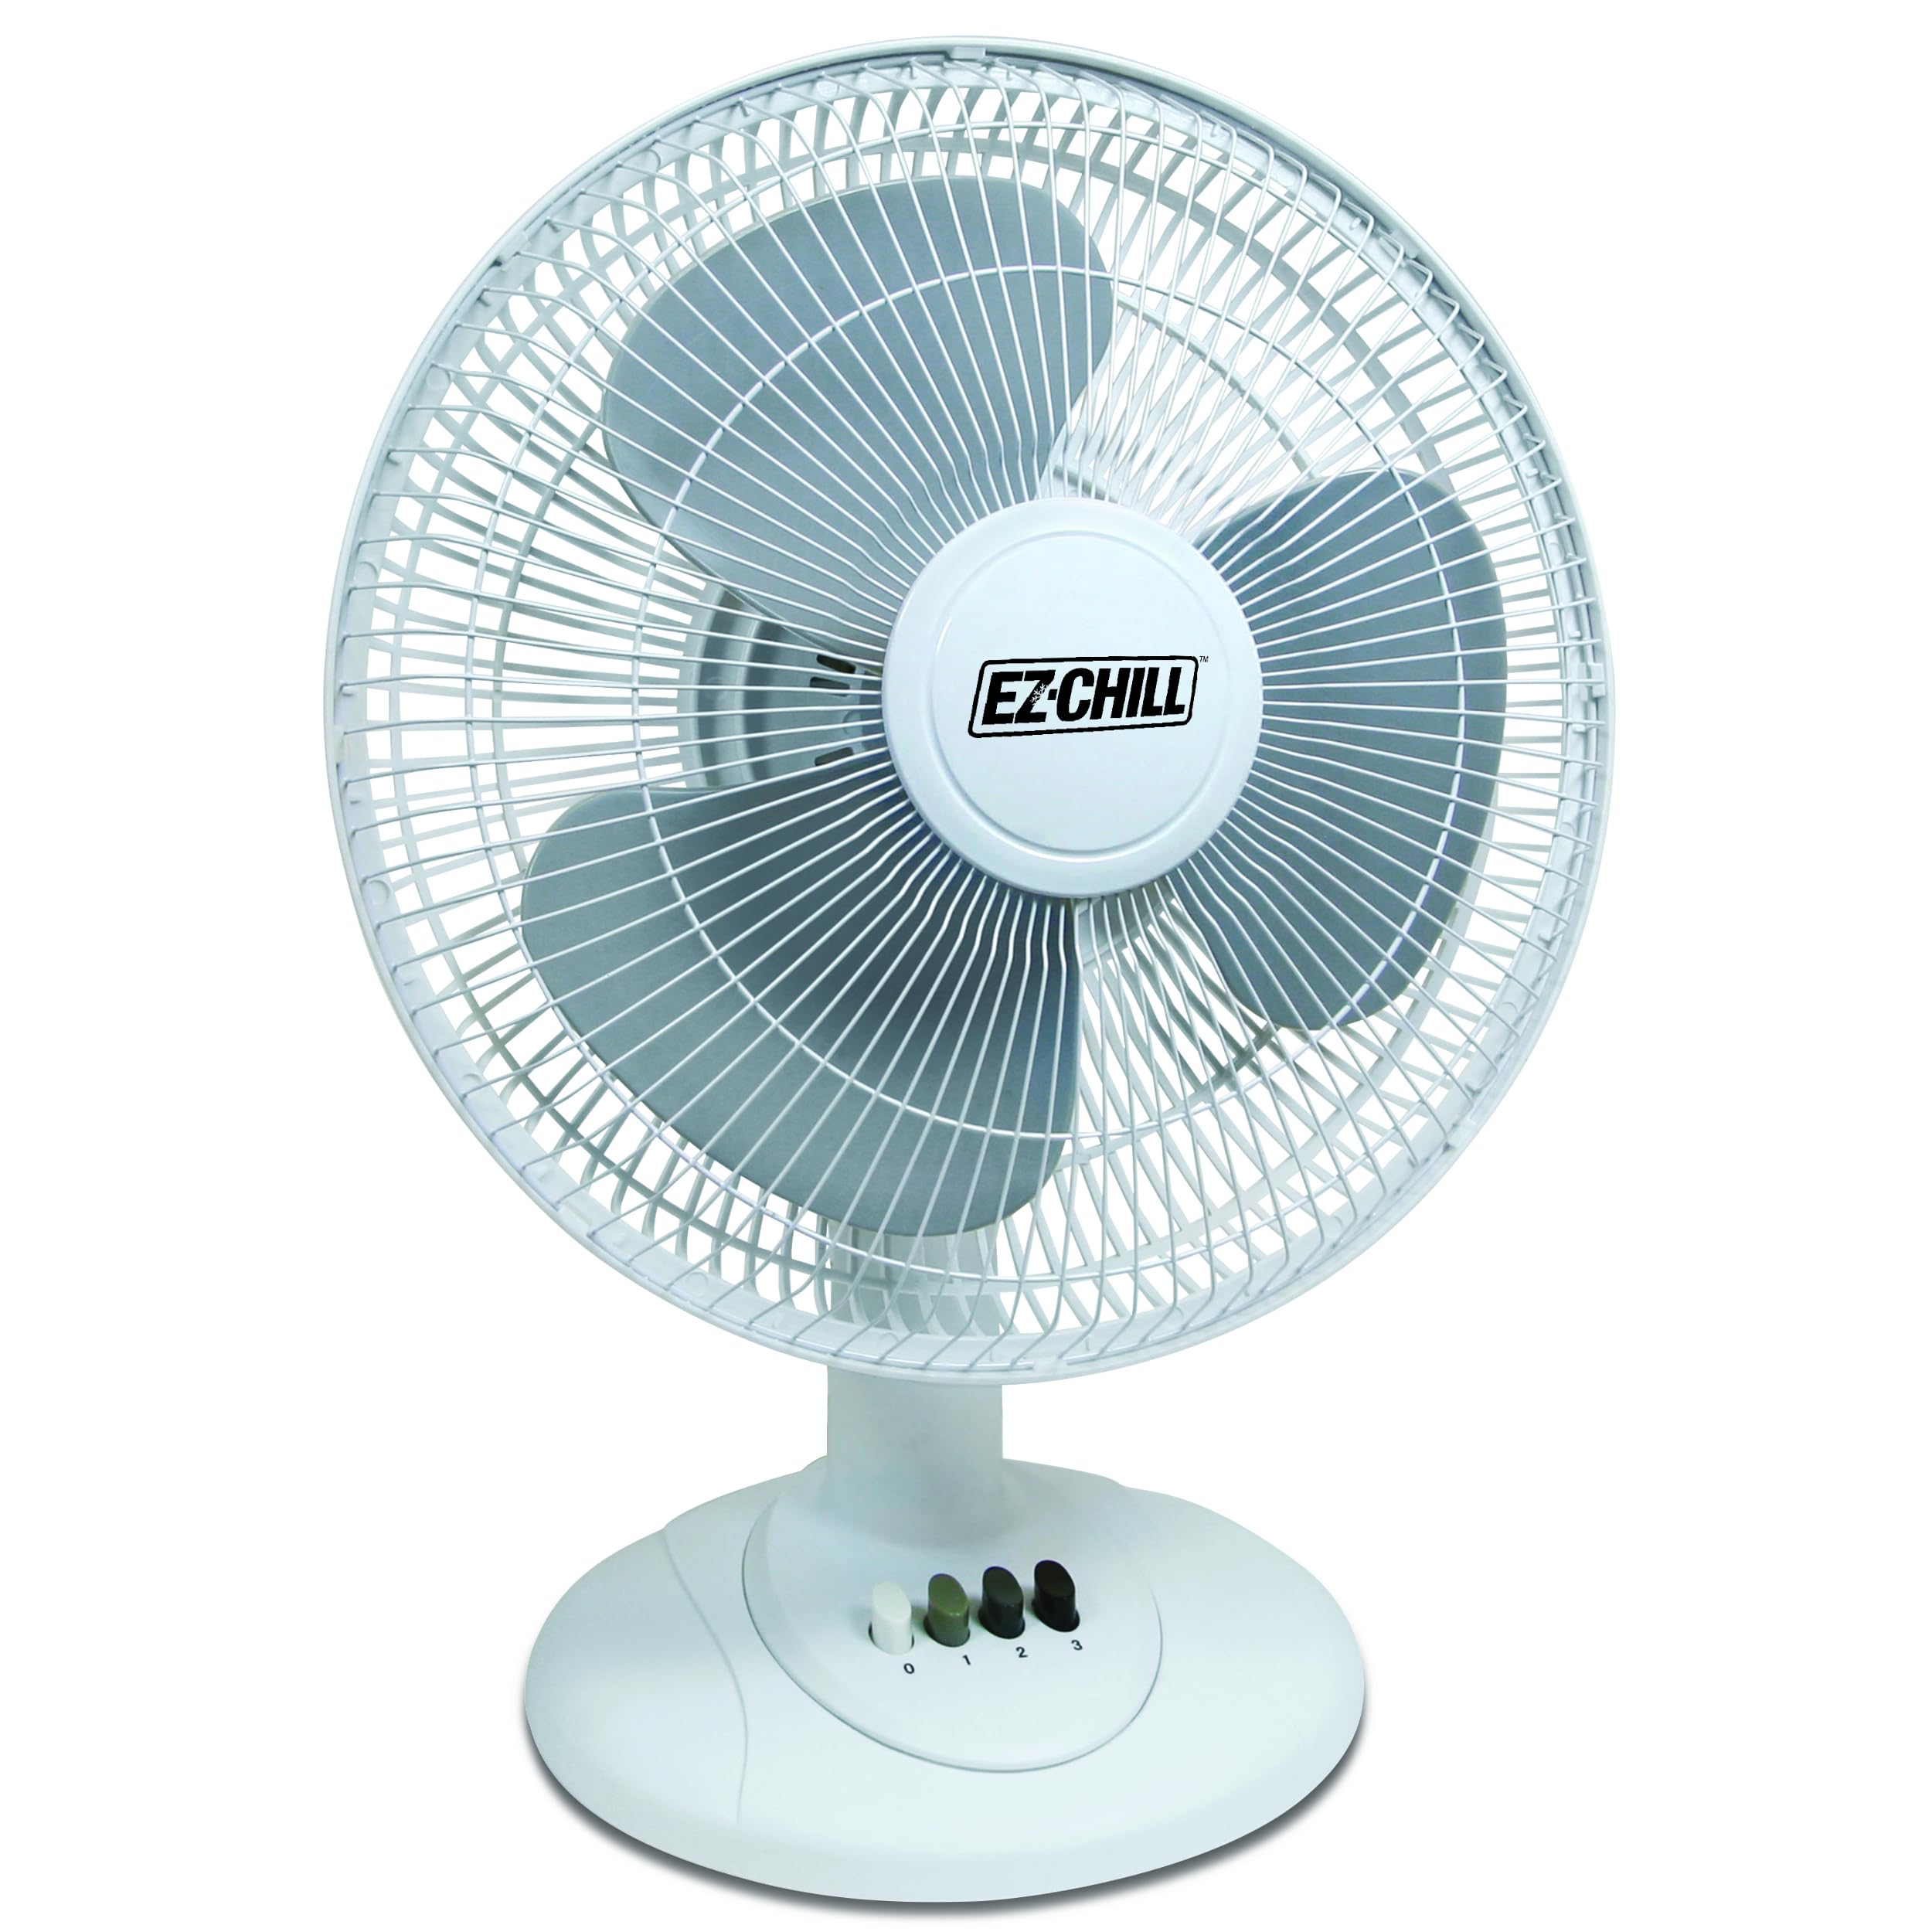 EZ-CHILL 12” 3-Speed Oscillating Table Fan with Adjustable Tilt, Convenient Push Button Controls, Quiet Operation, White, SB-MTSH05